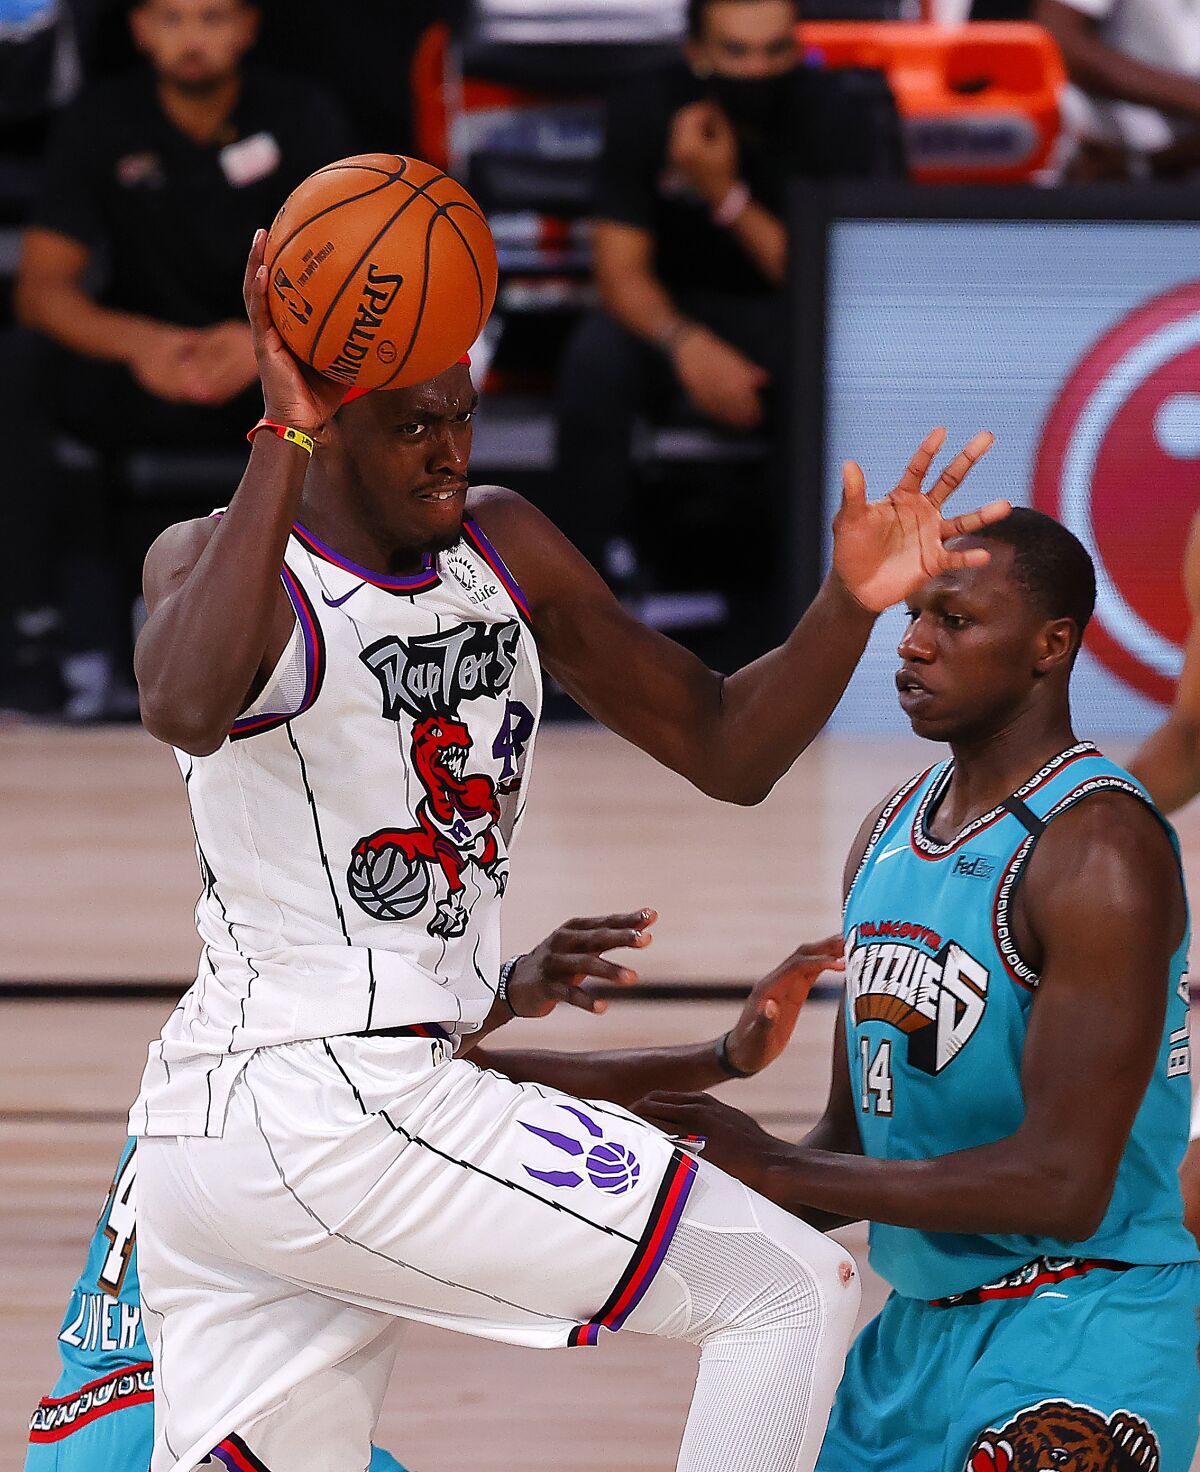 Toronto Raptors' Pascal Siakam, left, is charged with an offensive foul against Memphis Grizzlies' Gorgui Dieng, right, during the second quarter of an NBA basketball game Sunday, Aug. 9, 2020, in Lake Buena Vista, Fla. (Kevin C. Cox/Pool Photo via AP)